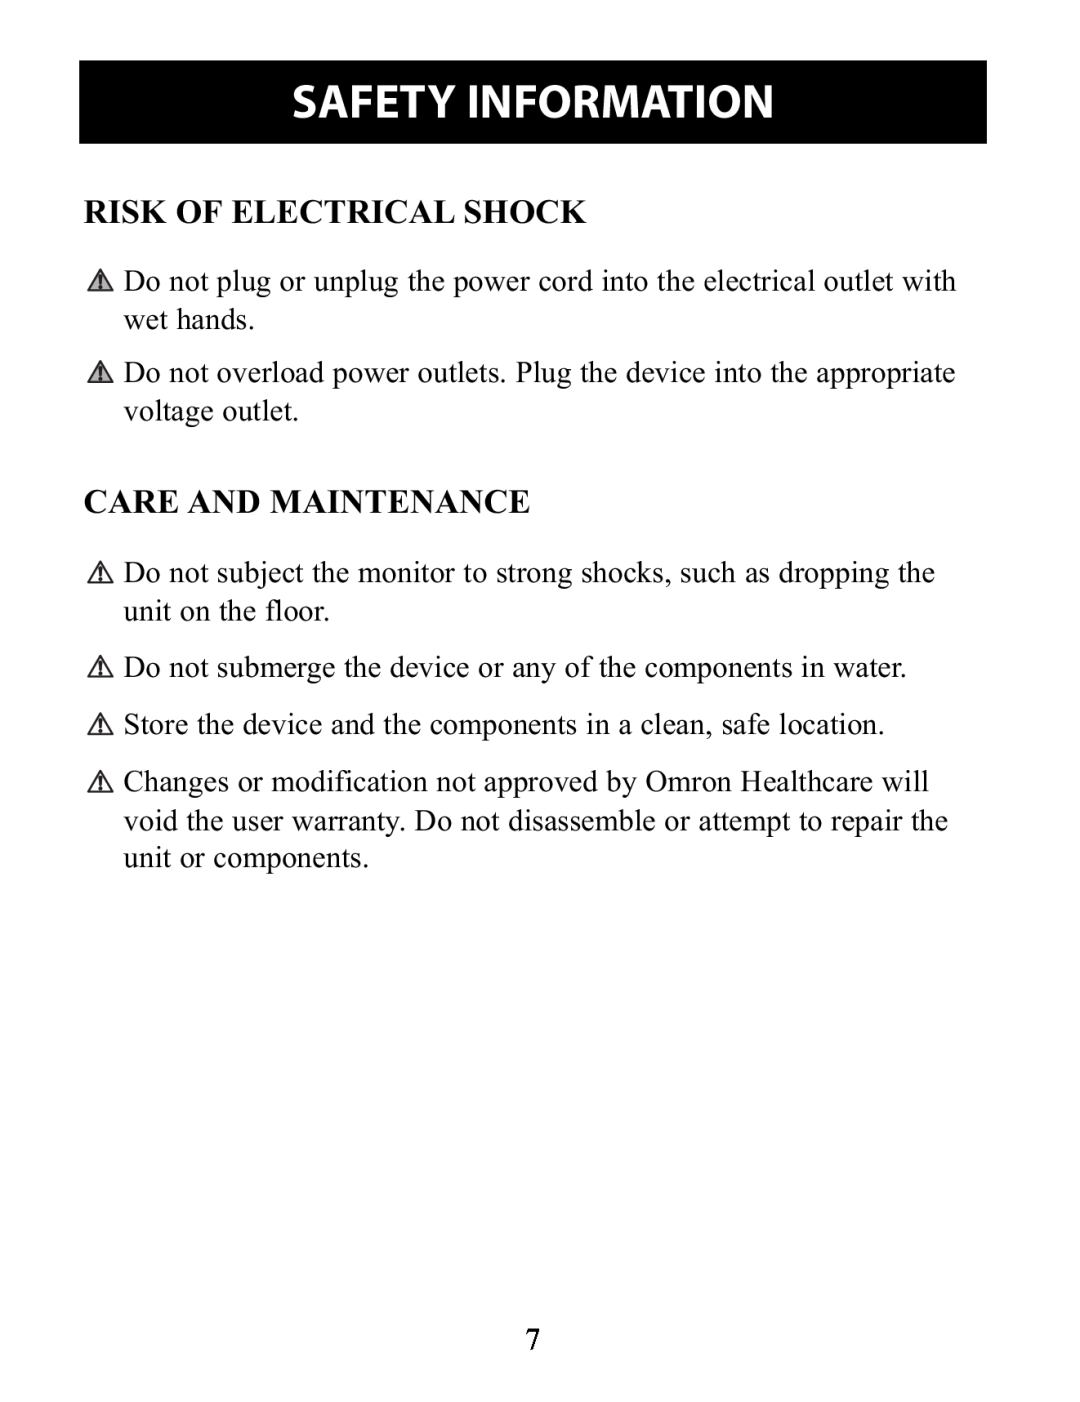 Omron Healthcare BP791IT instruction manual Risk Of Electrical Shock, Care And Maintenance, Safety Information 